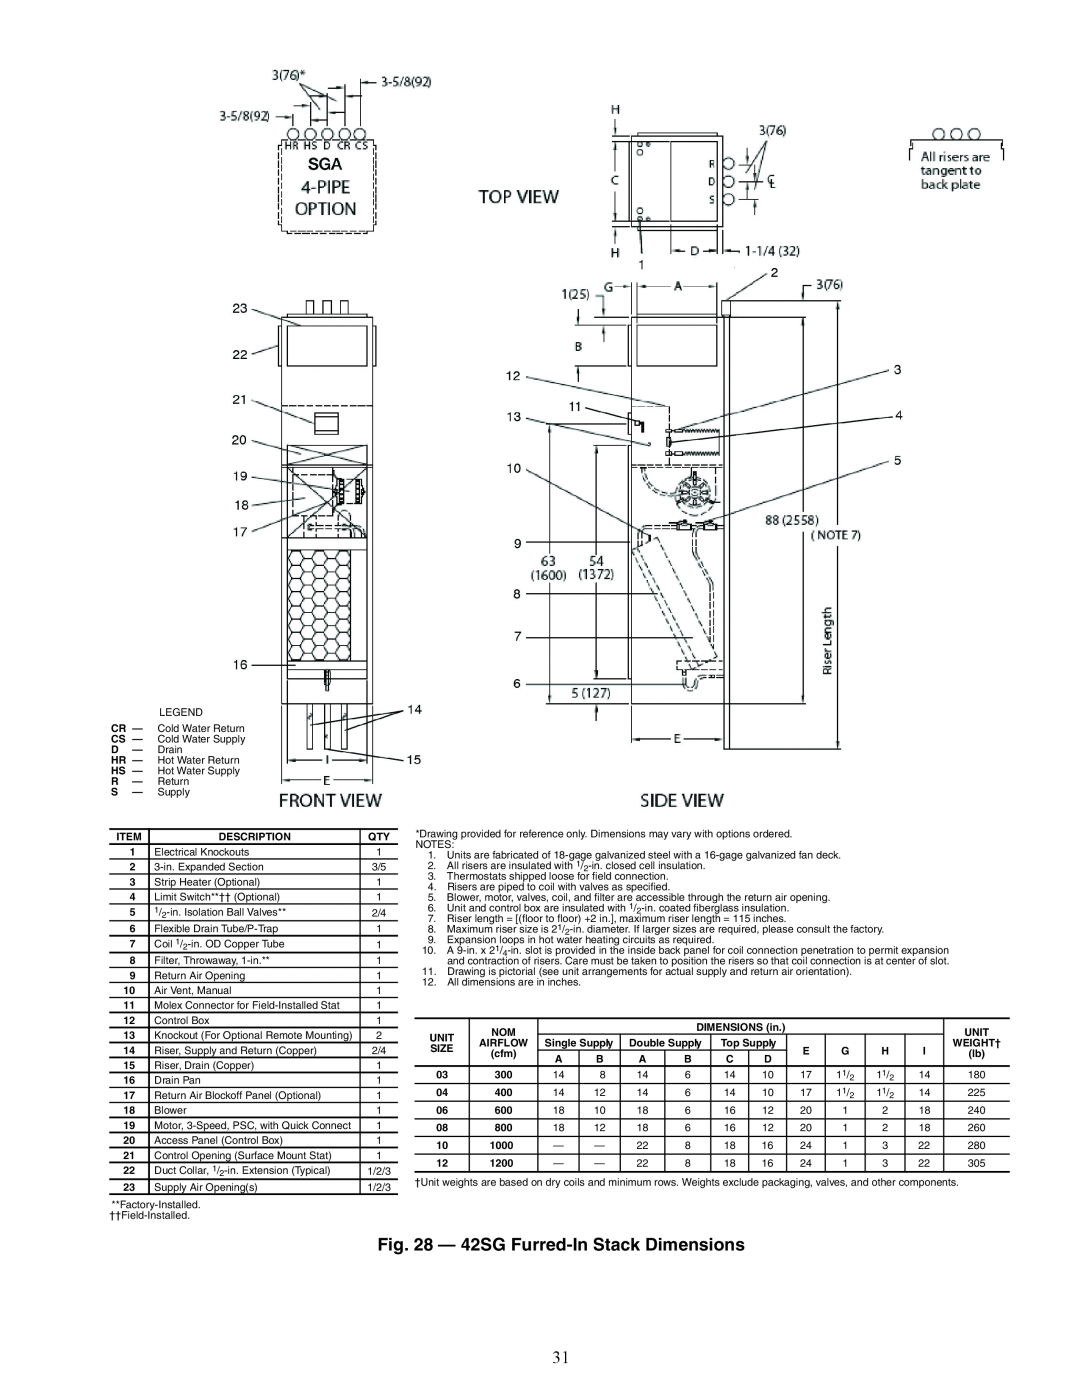 Carrier 42V, 42C, 42D specifications A42-4125, 42SG Furred-InStack Dimensions 